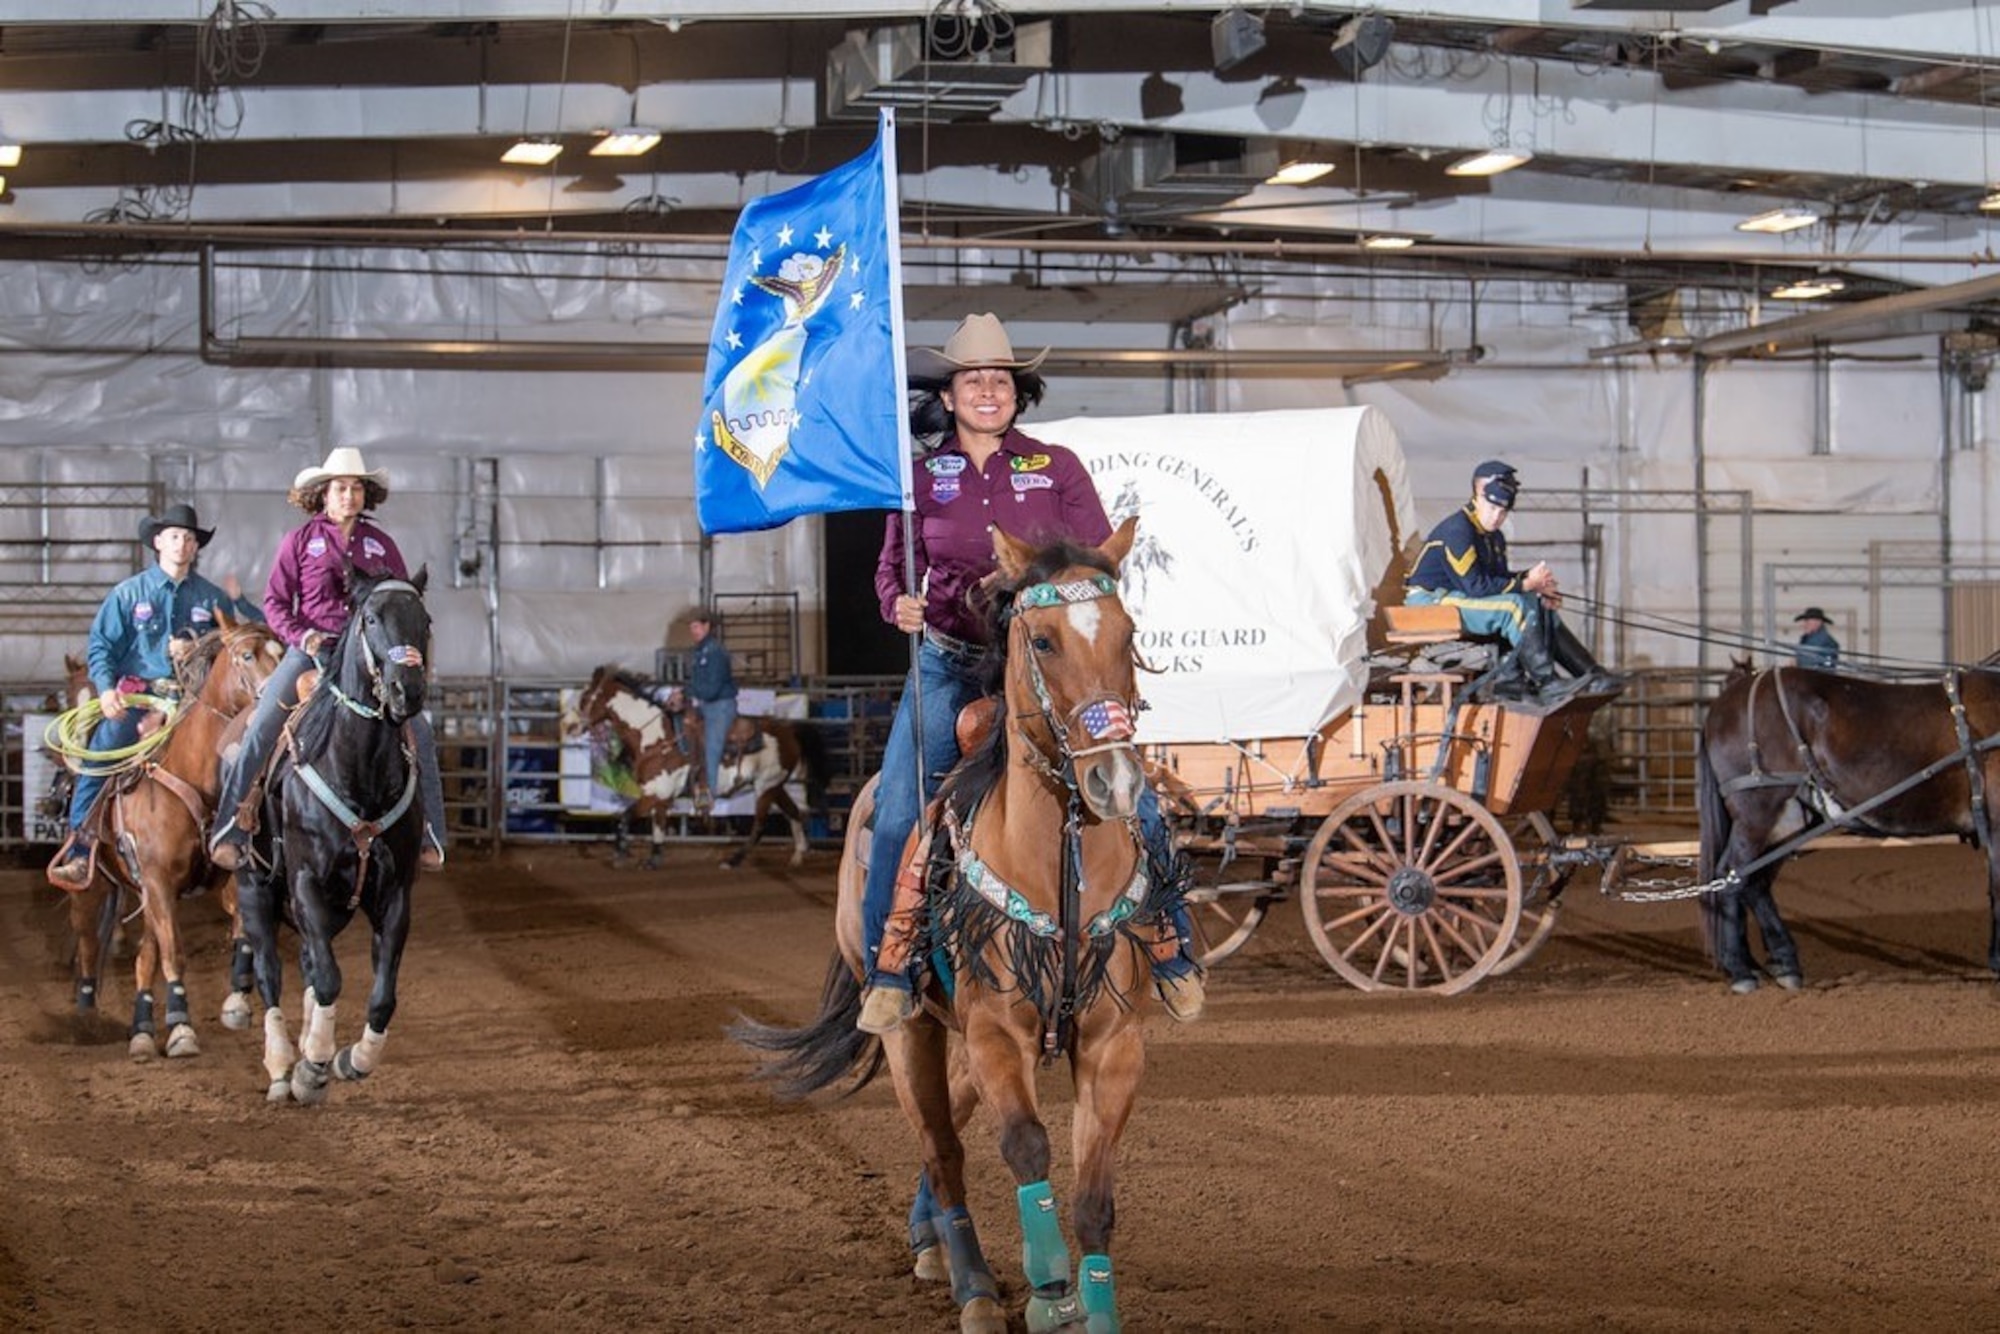 Master Sgt. Jenniffer Teets, 436th Comptroller Squadron, carries the Air Force flag while on horseback during a rodeo competition. (Courtesy photo)